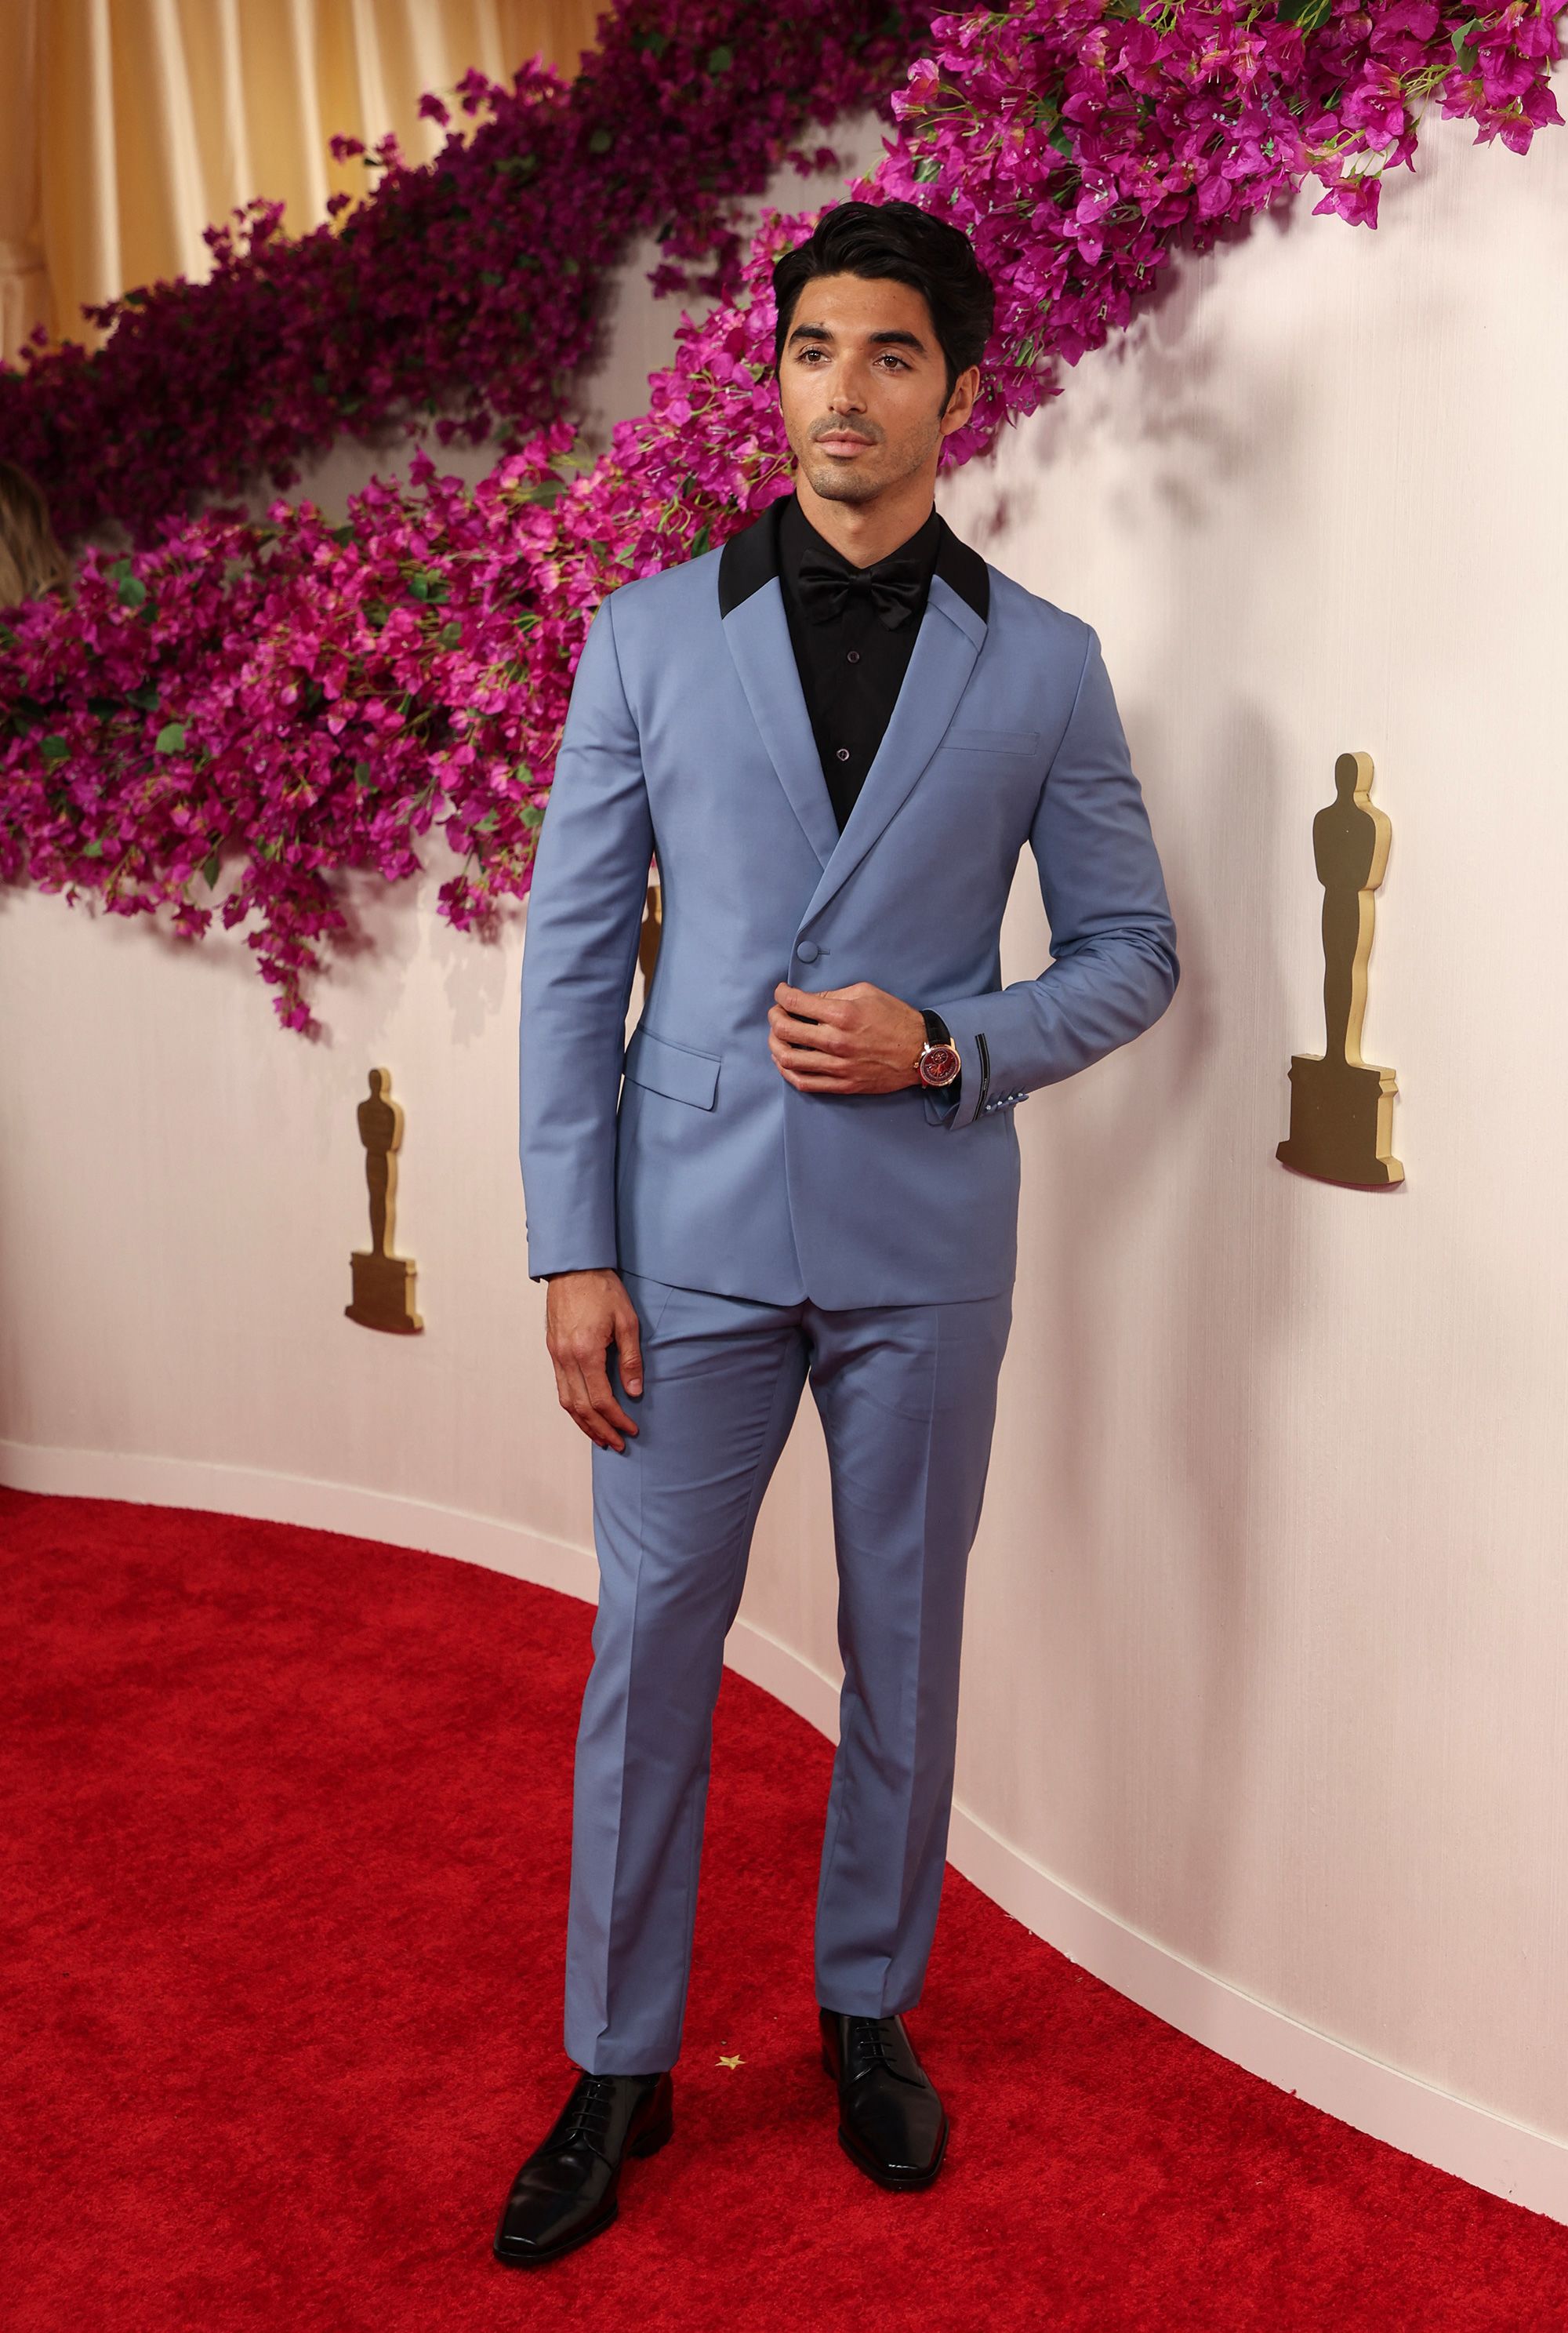 Taylor Zakhar Perez popped on the red carpet with a blue Prada suit styled by leading celebrity stylist Jason Bolden. He paired the look with a Vacheron Constantin watch.